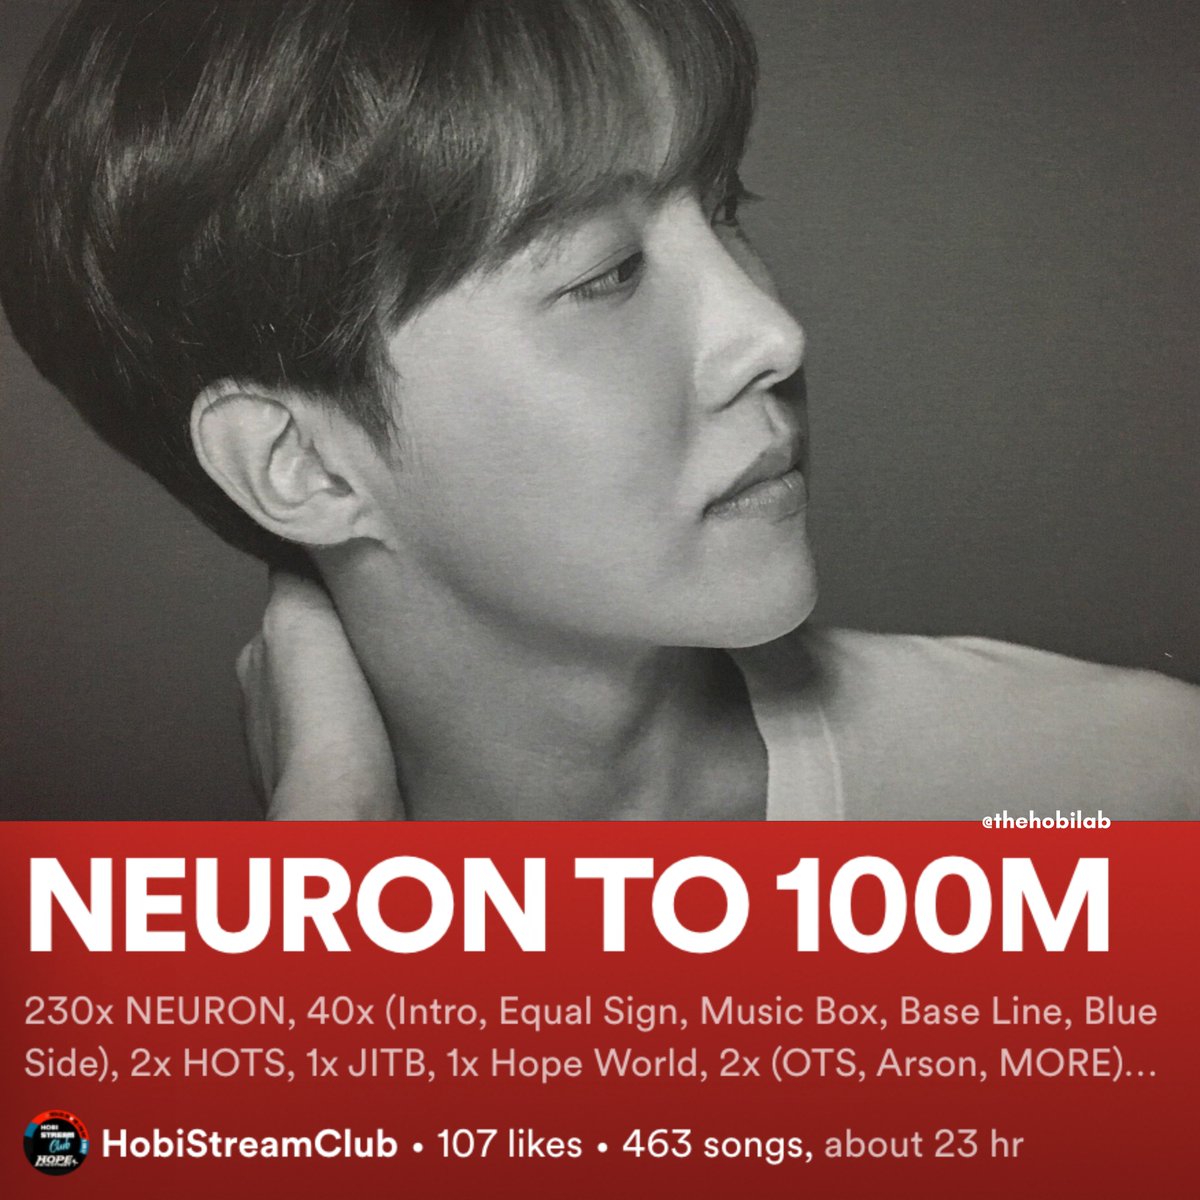 #jhope_NEURON: 'Cause these neurons are the cells that awakened me' 🖊️ #hobi likened the neuron's essential brain function to his Neuron hyungs who gave him the kickstart as a dancer. Uber-brilliant line, but make it danceable. That's #jhope!💎 STREAM: tinyurl.com/bddedr3d